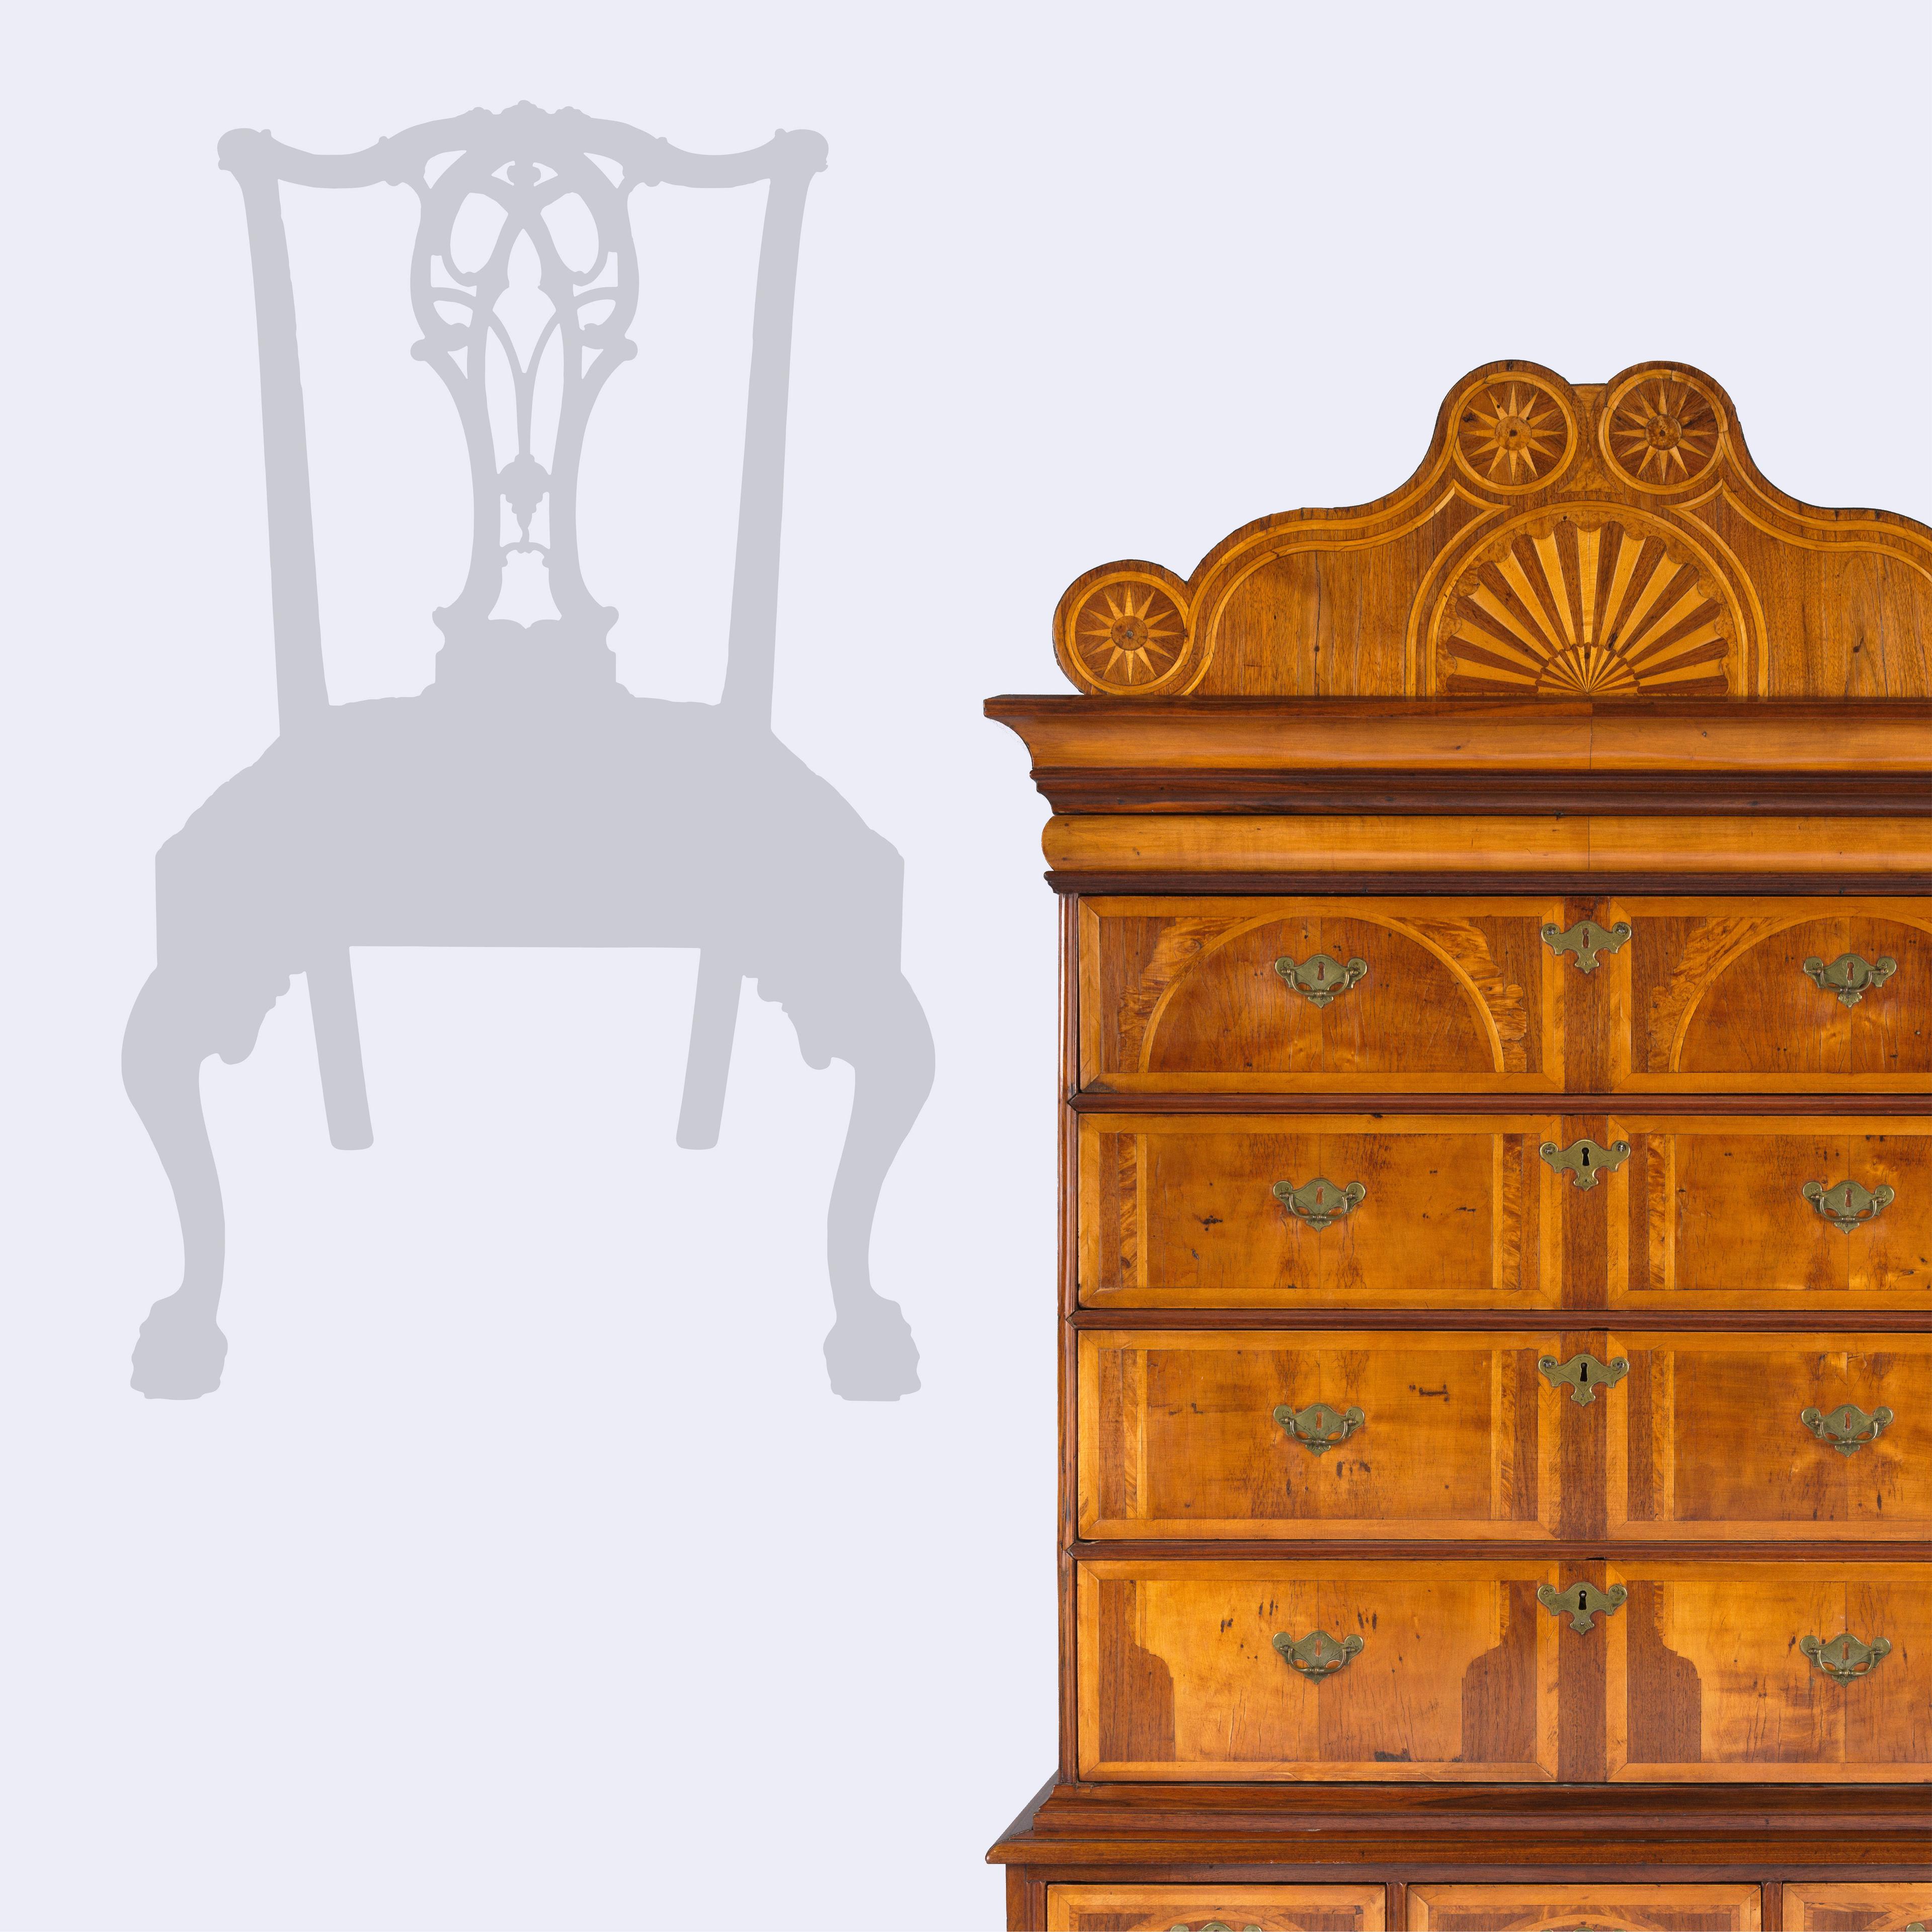 Classic outline of wood chair, beside wood dresser